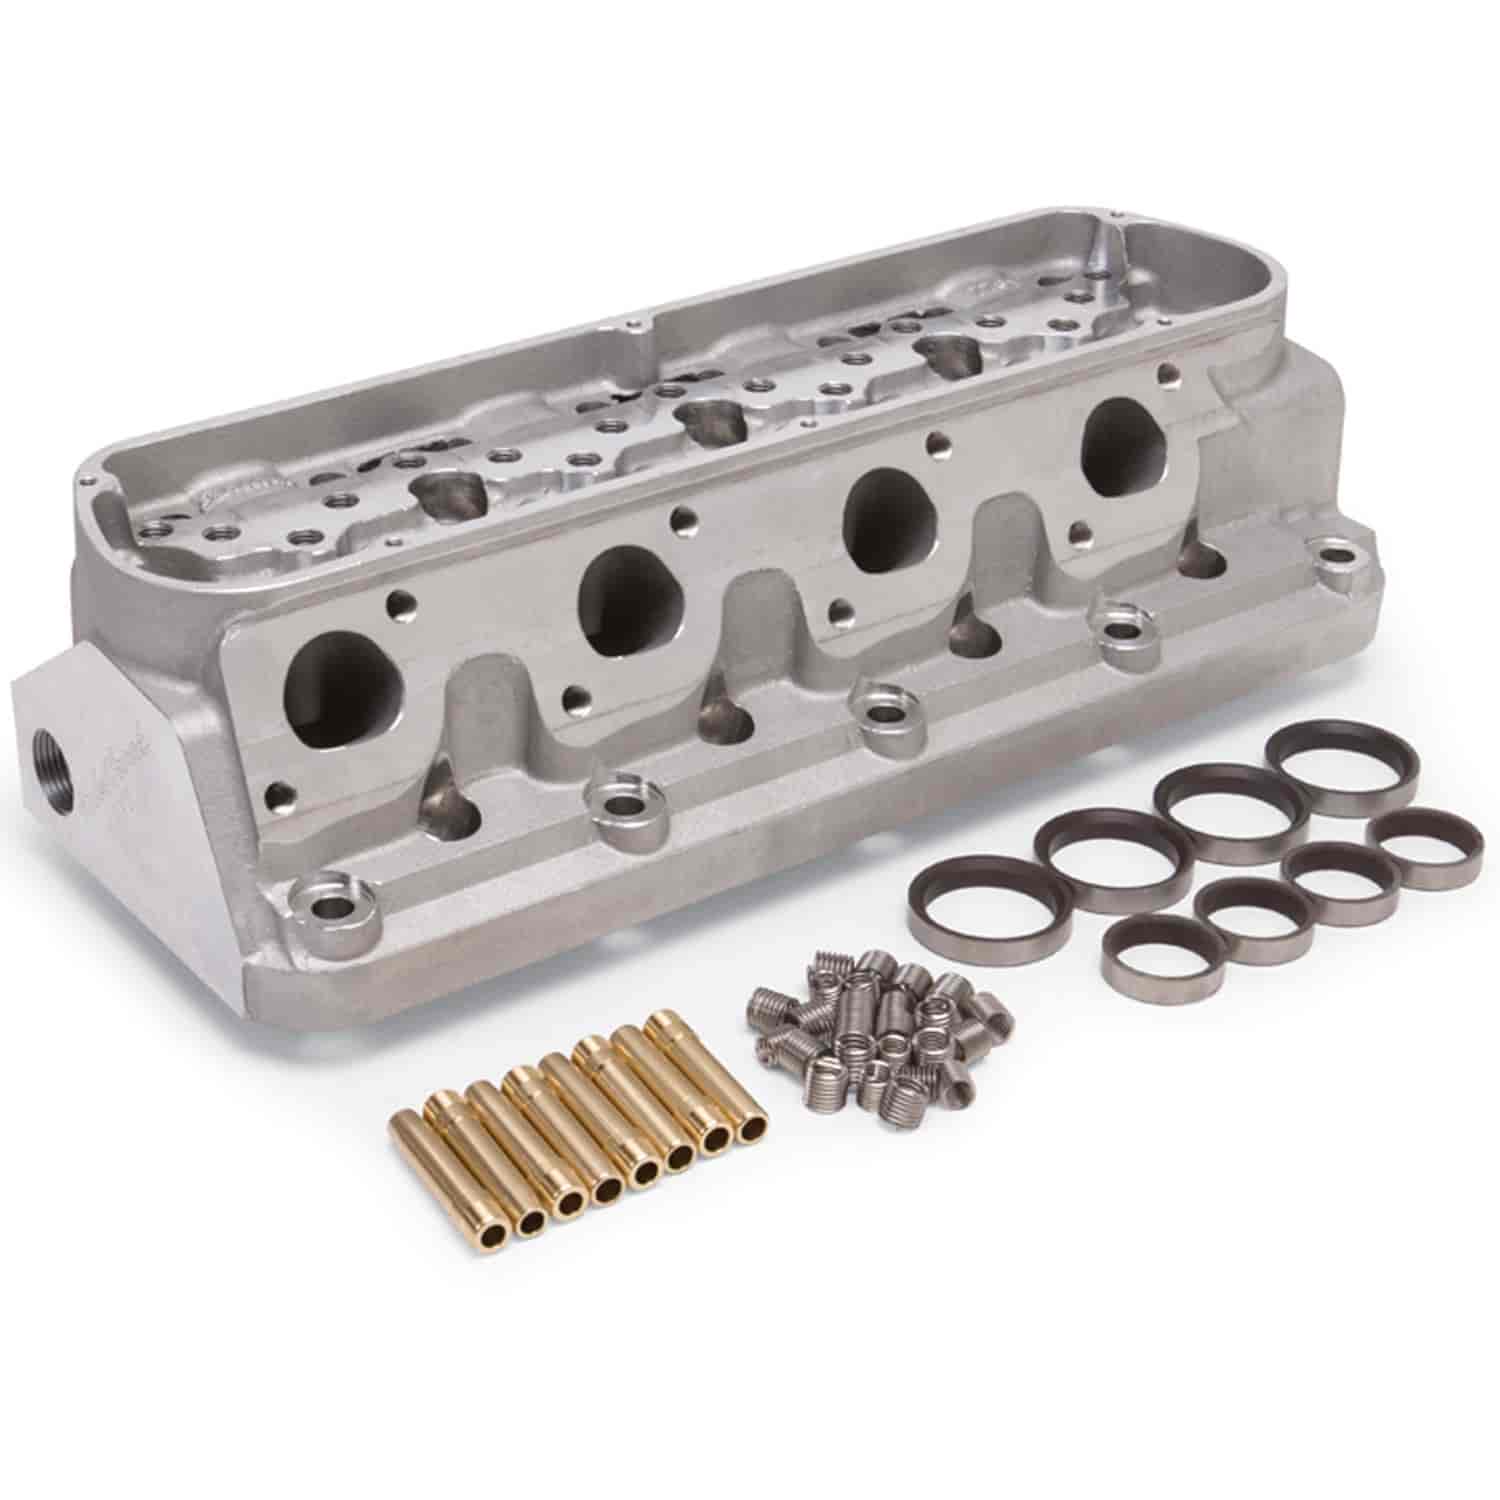 Pro Port Raw Glidden Victor II Cylinder Head for Small Block Ford